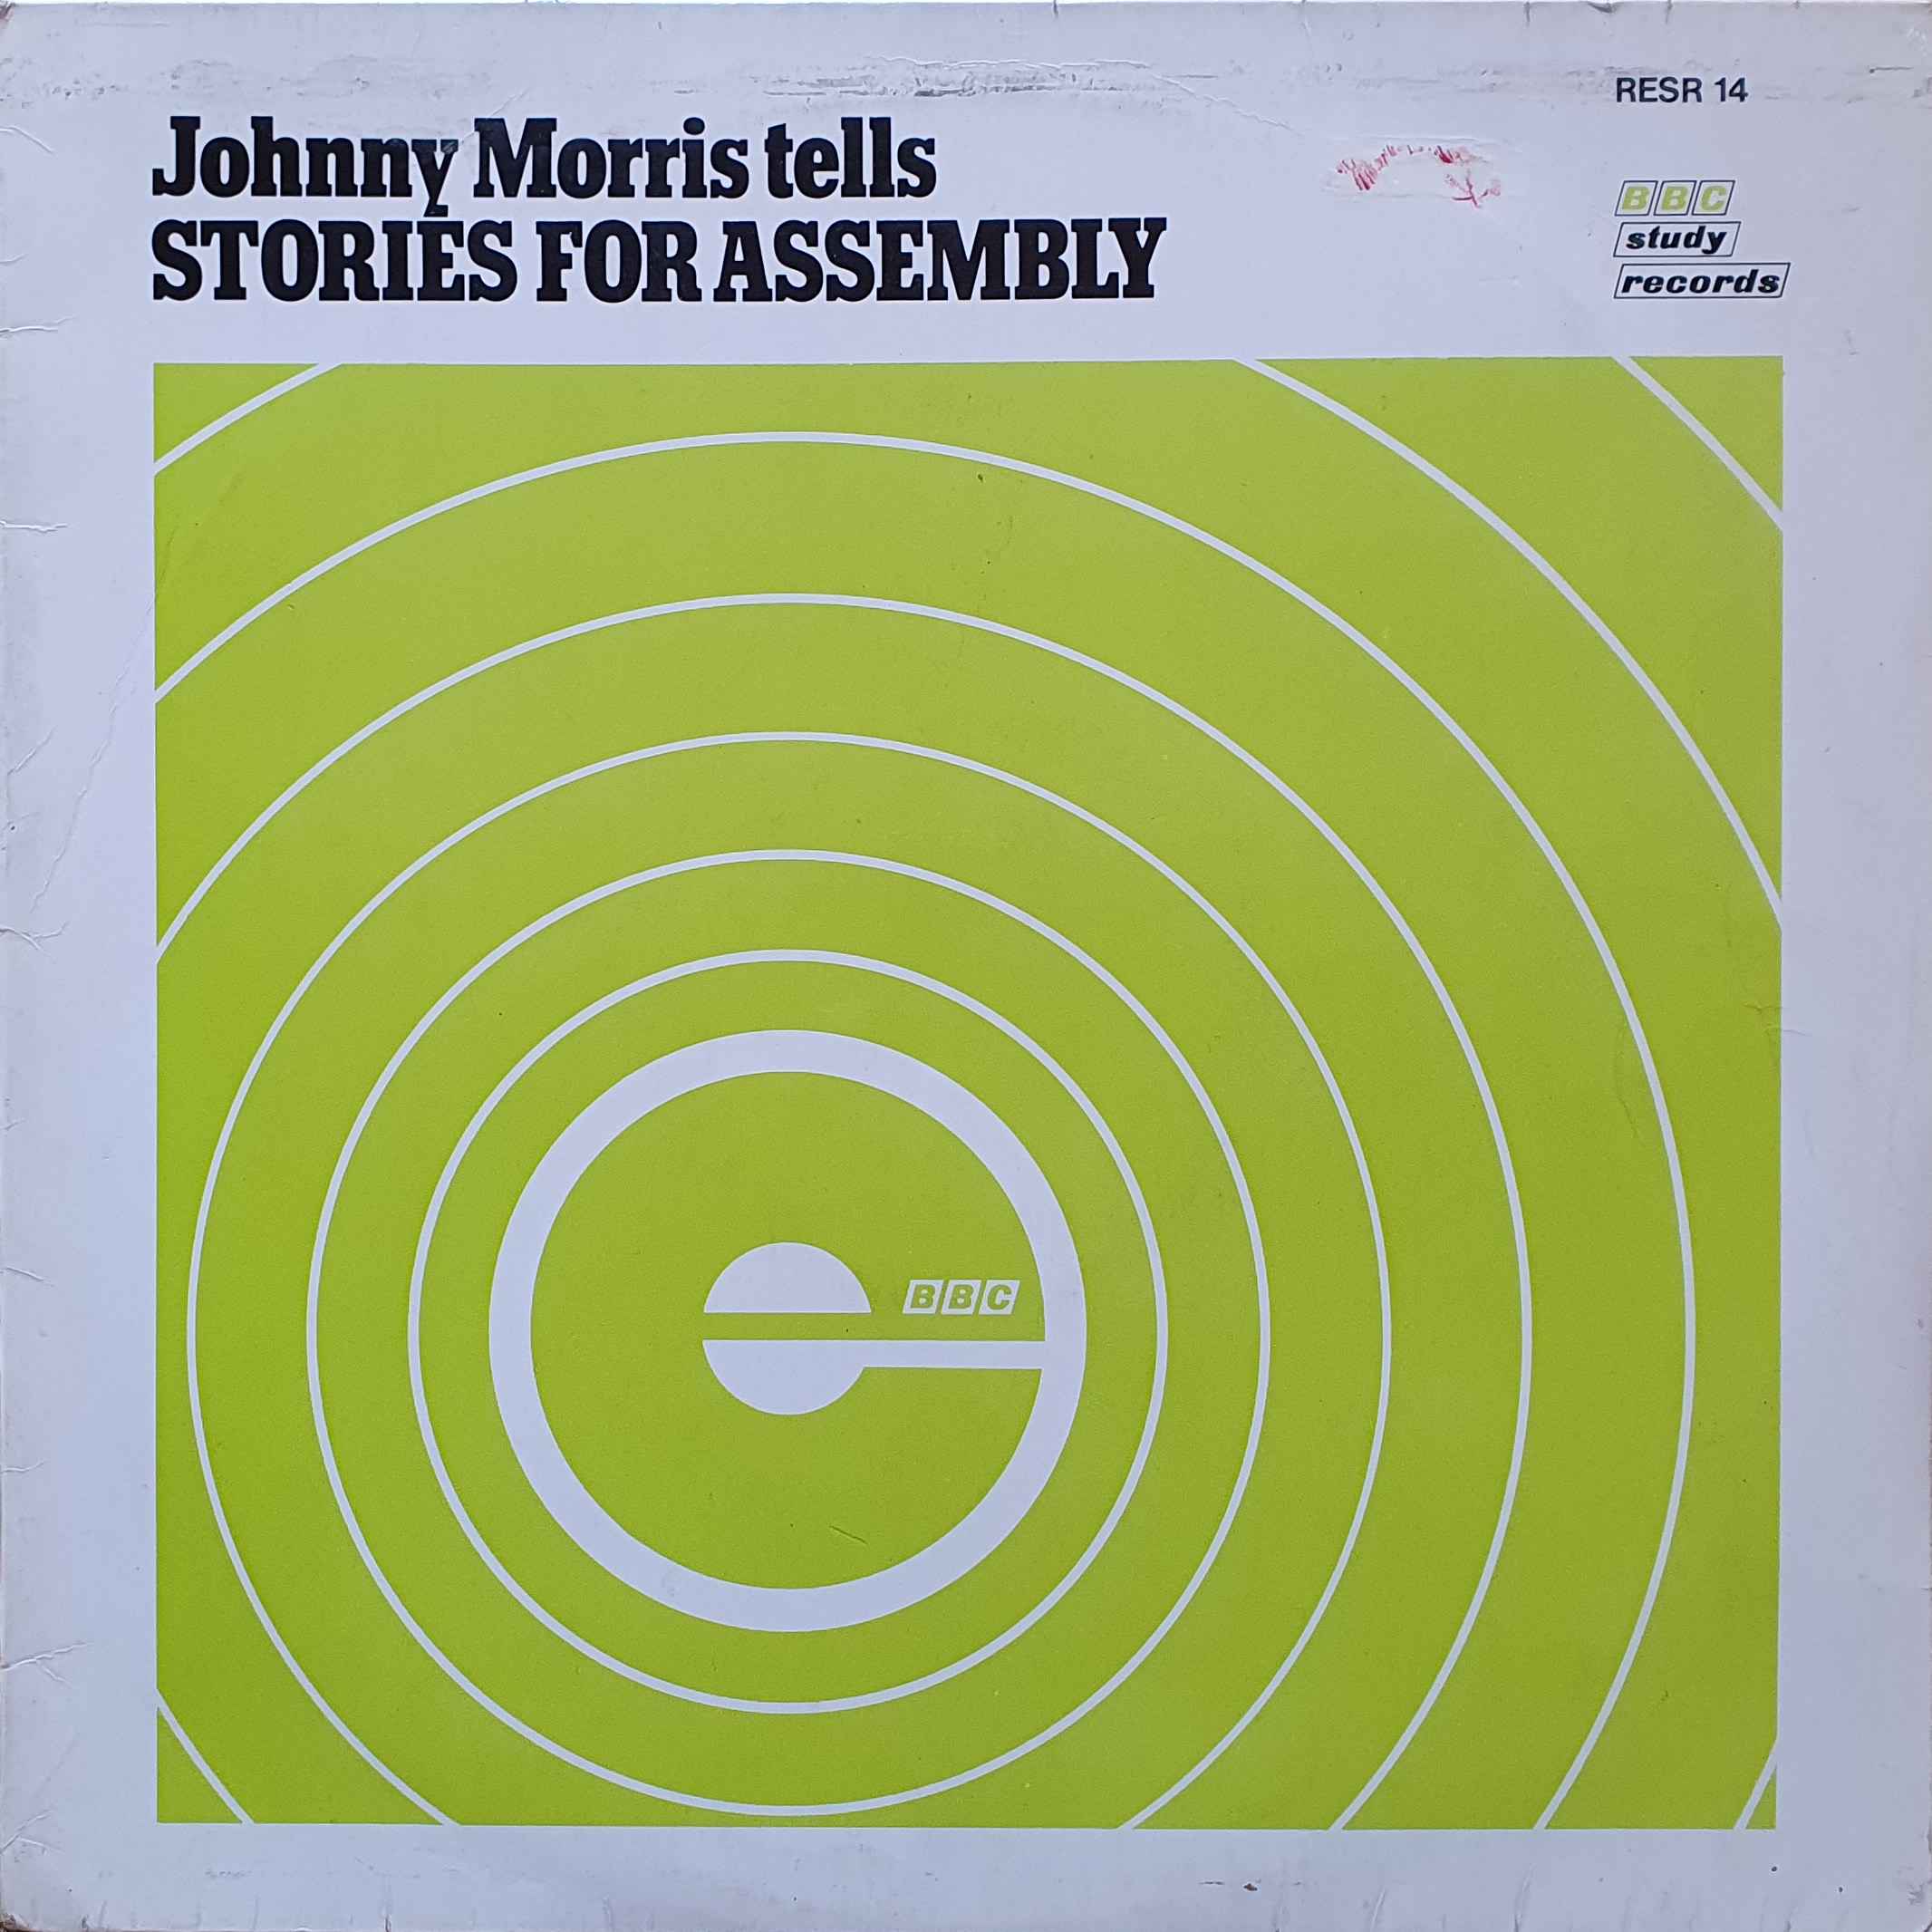 Picture of RESR 14 Stories for assembly by artist Johnny Morris from the BBC albums - Records and Tapes library